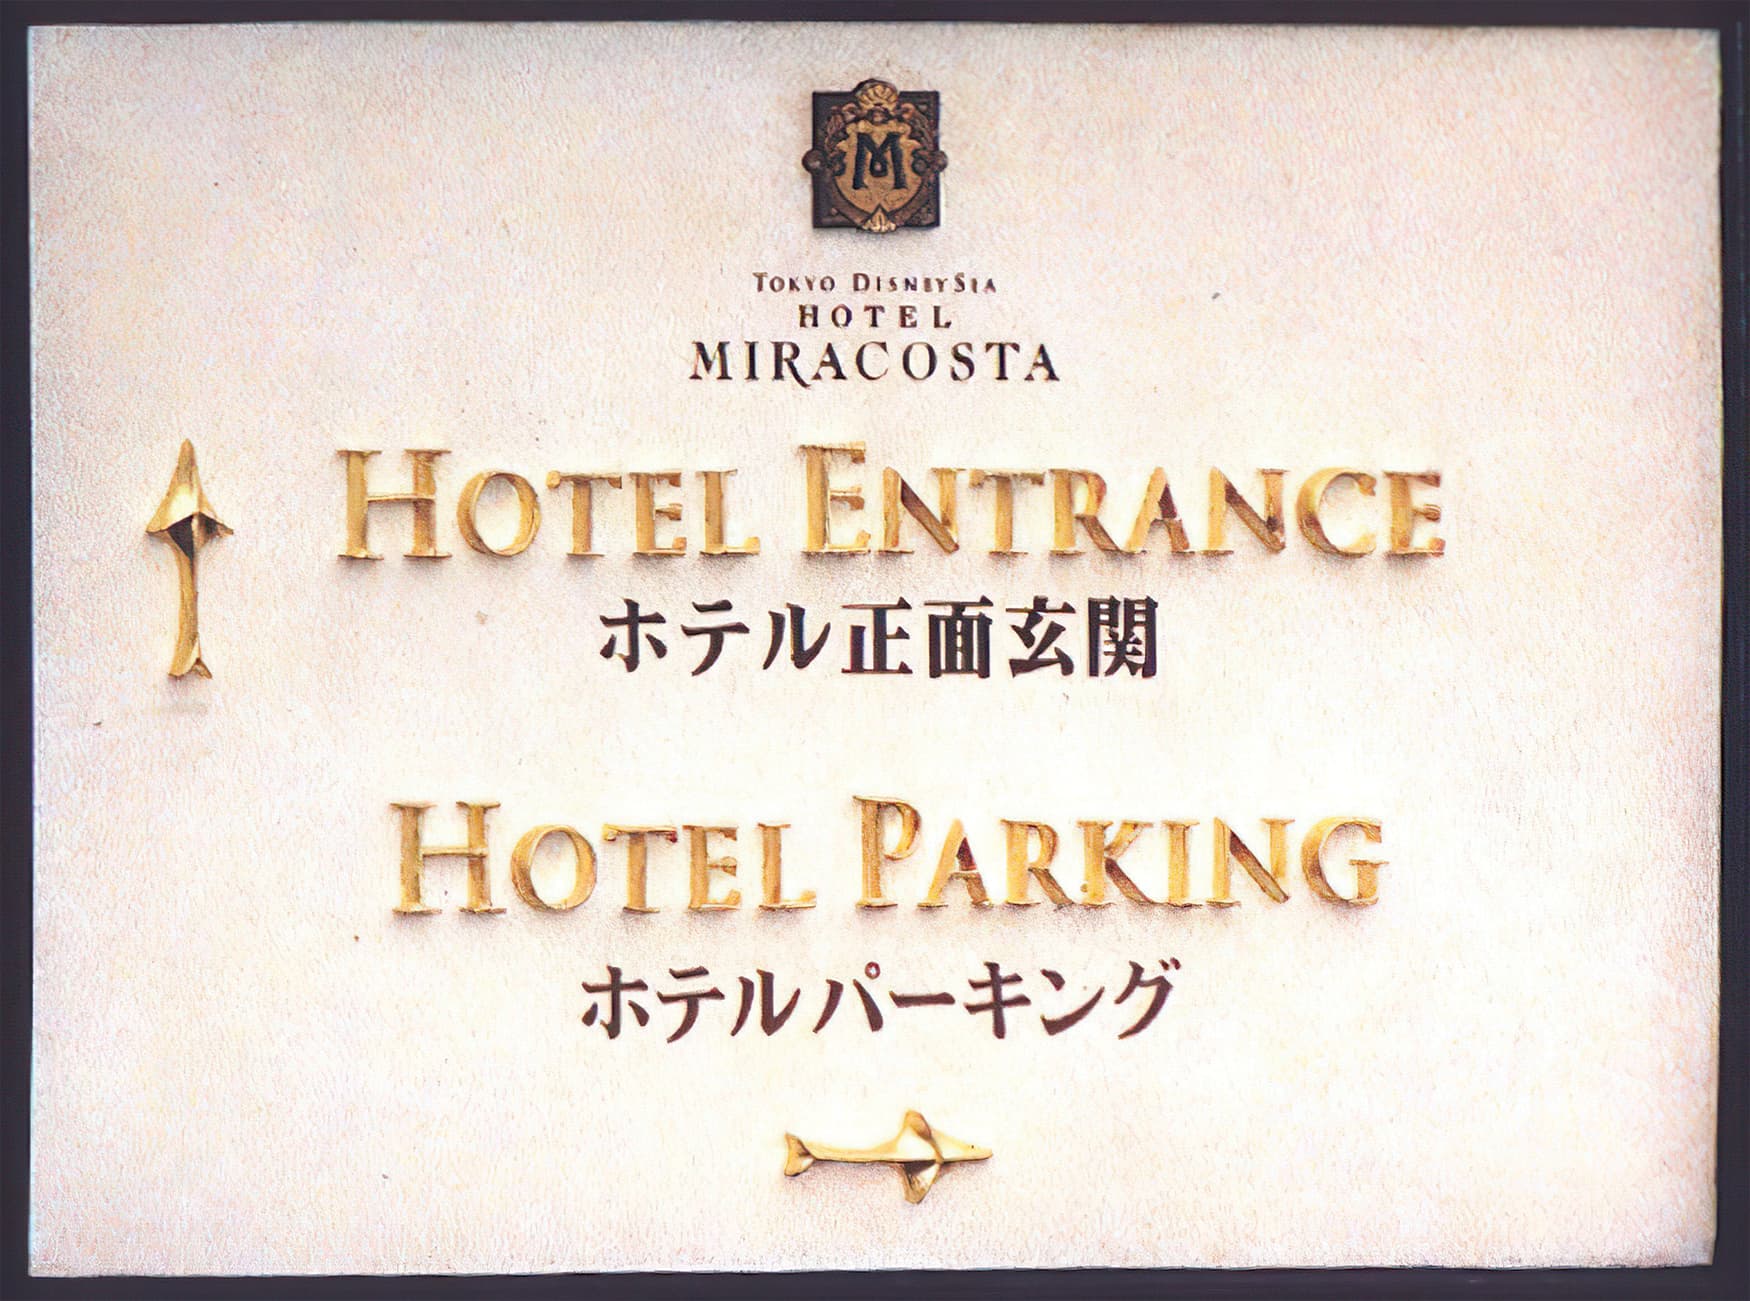 Disney Hotel Miracosta, located in Tokyo, Japan. Hospitality Design. RSM Design was commissioned to create the identity, logo, branding, and signage.